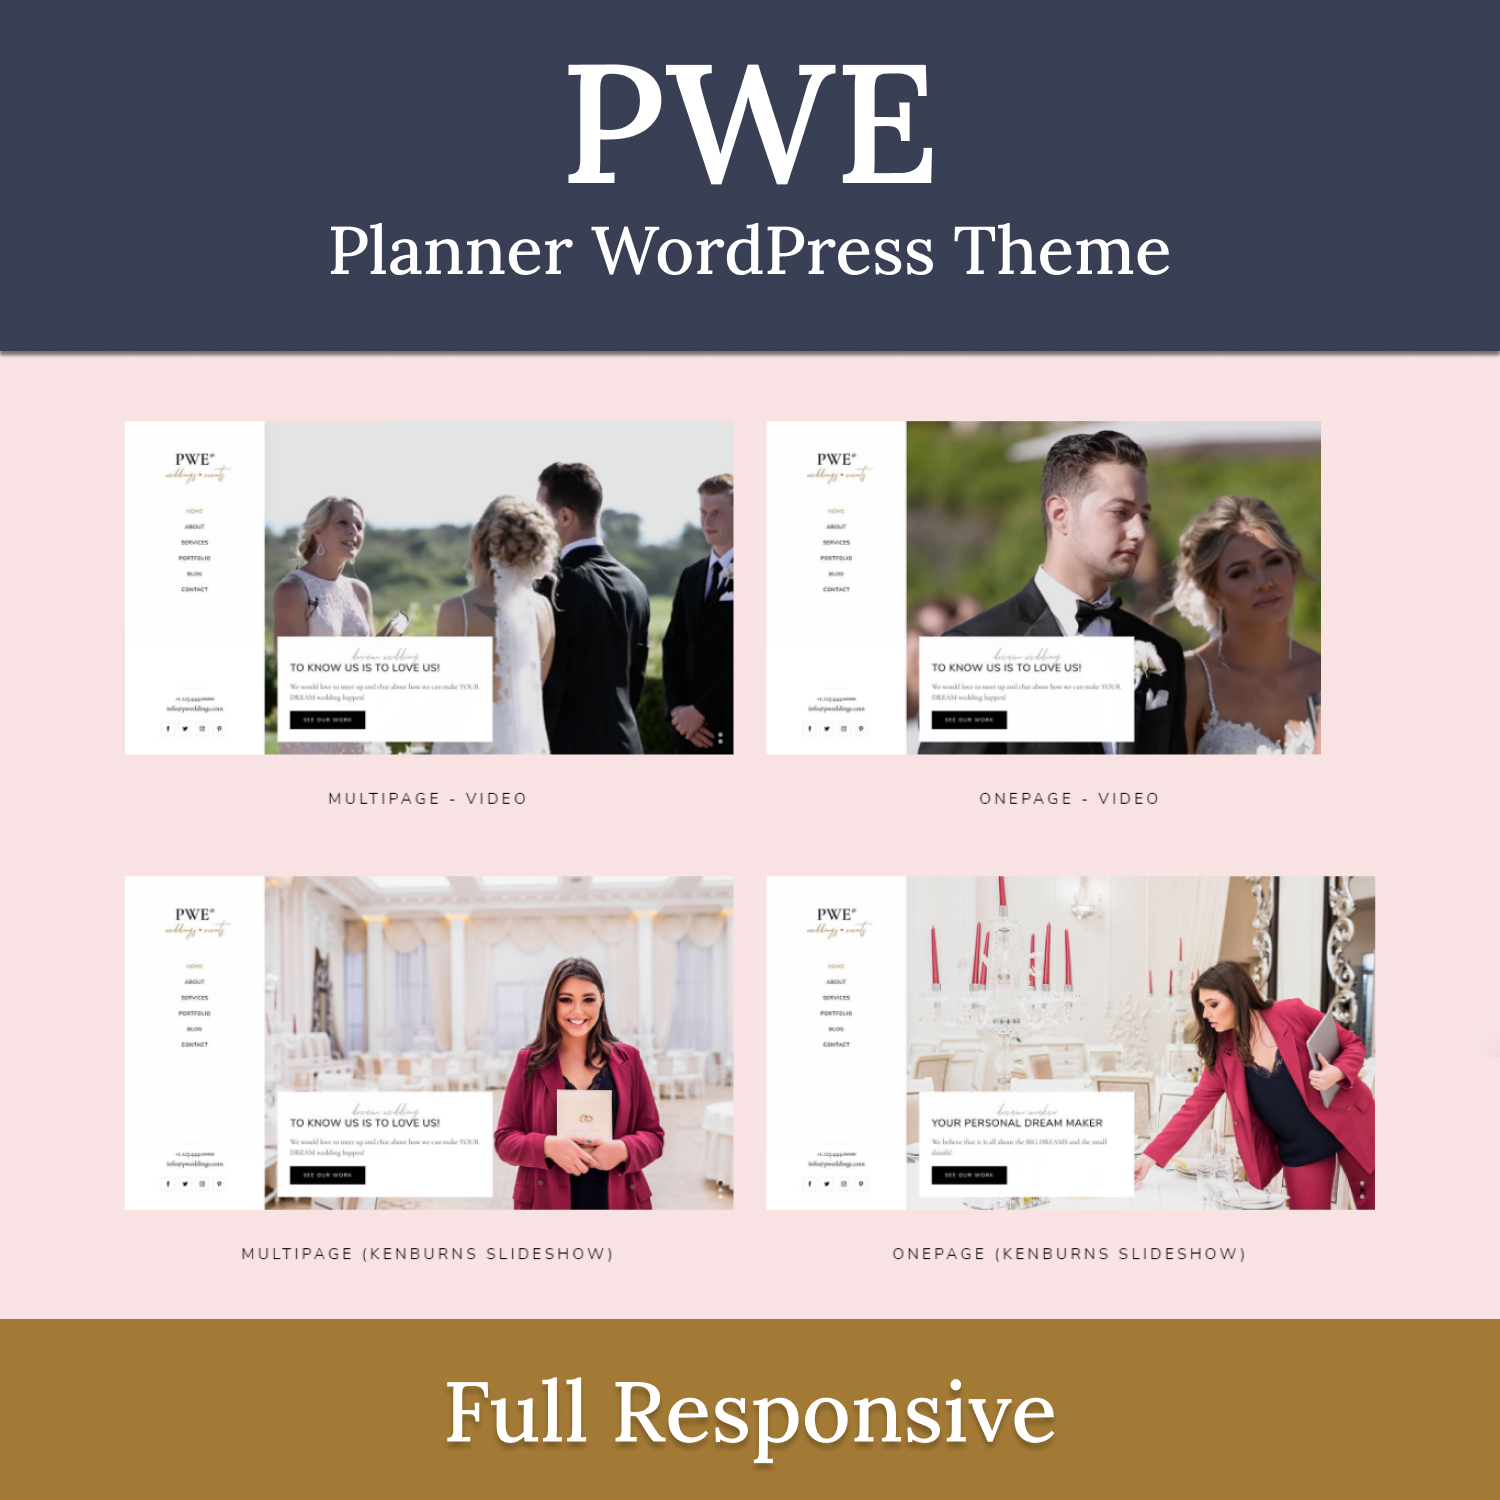 Preview pwe wedding and event planner wordpress theme.